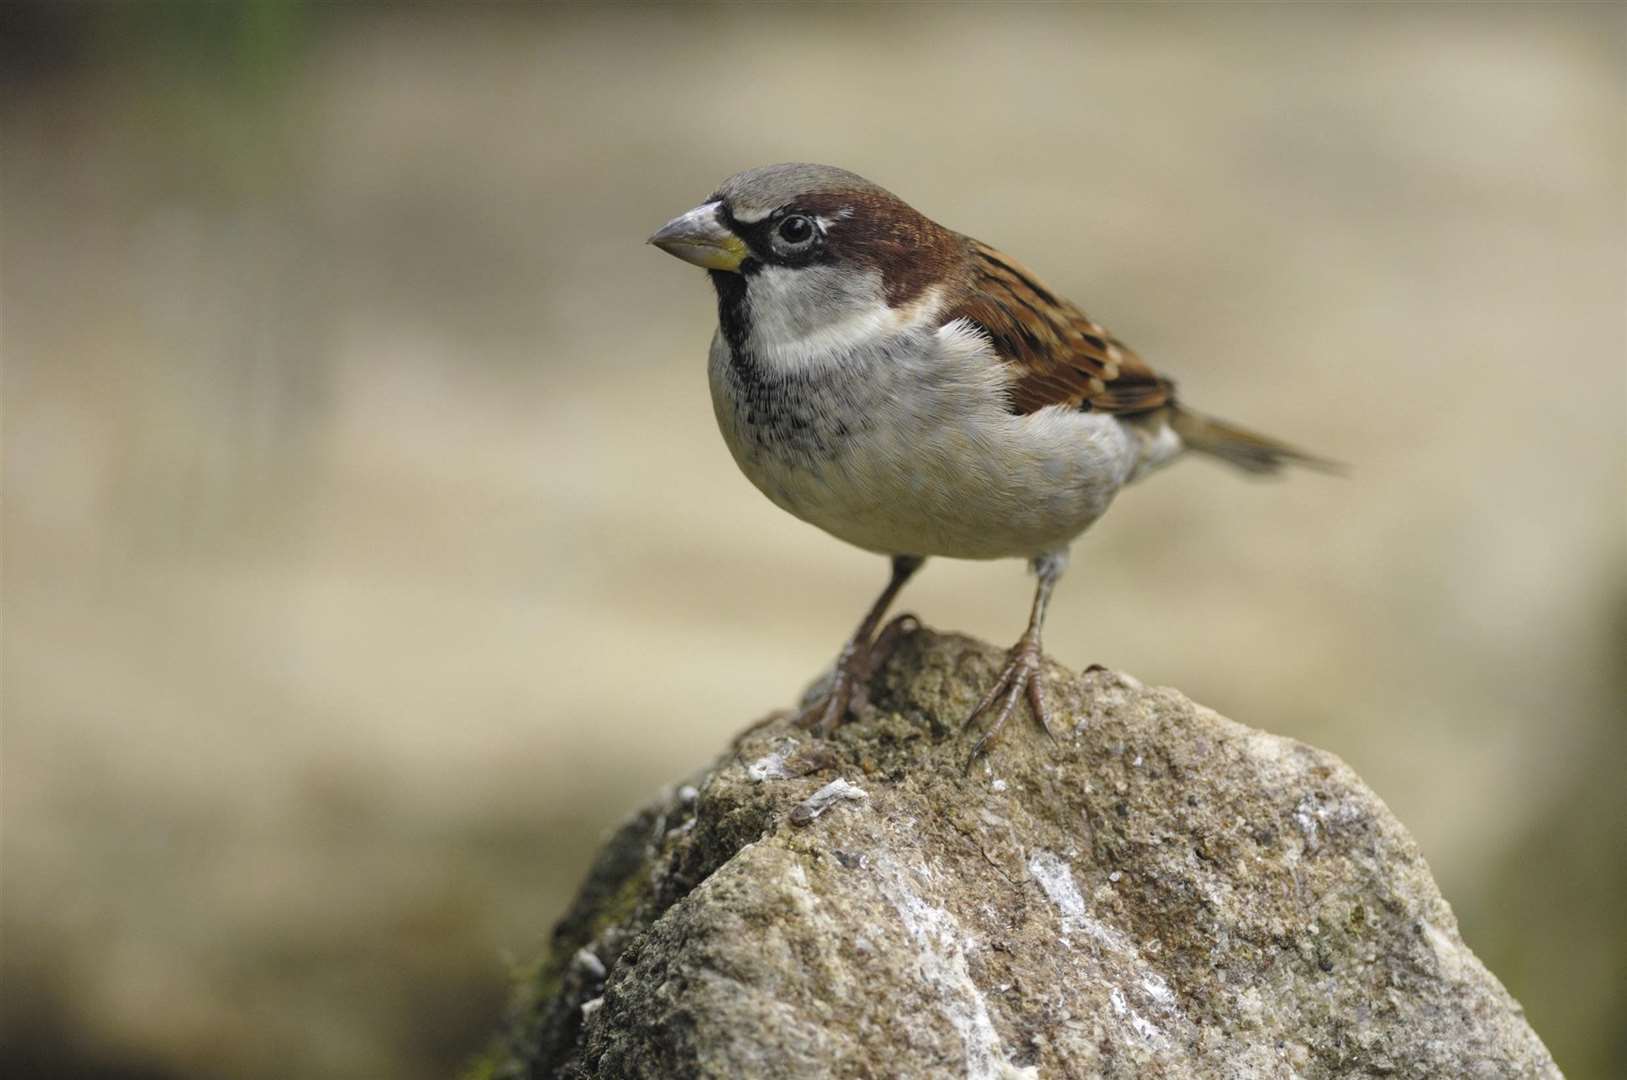 The house sparrow was spotted the most in Kent Picture: RSPB/Ray Kennedy